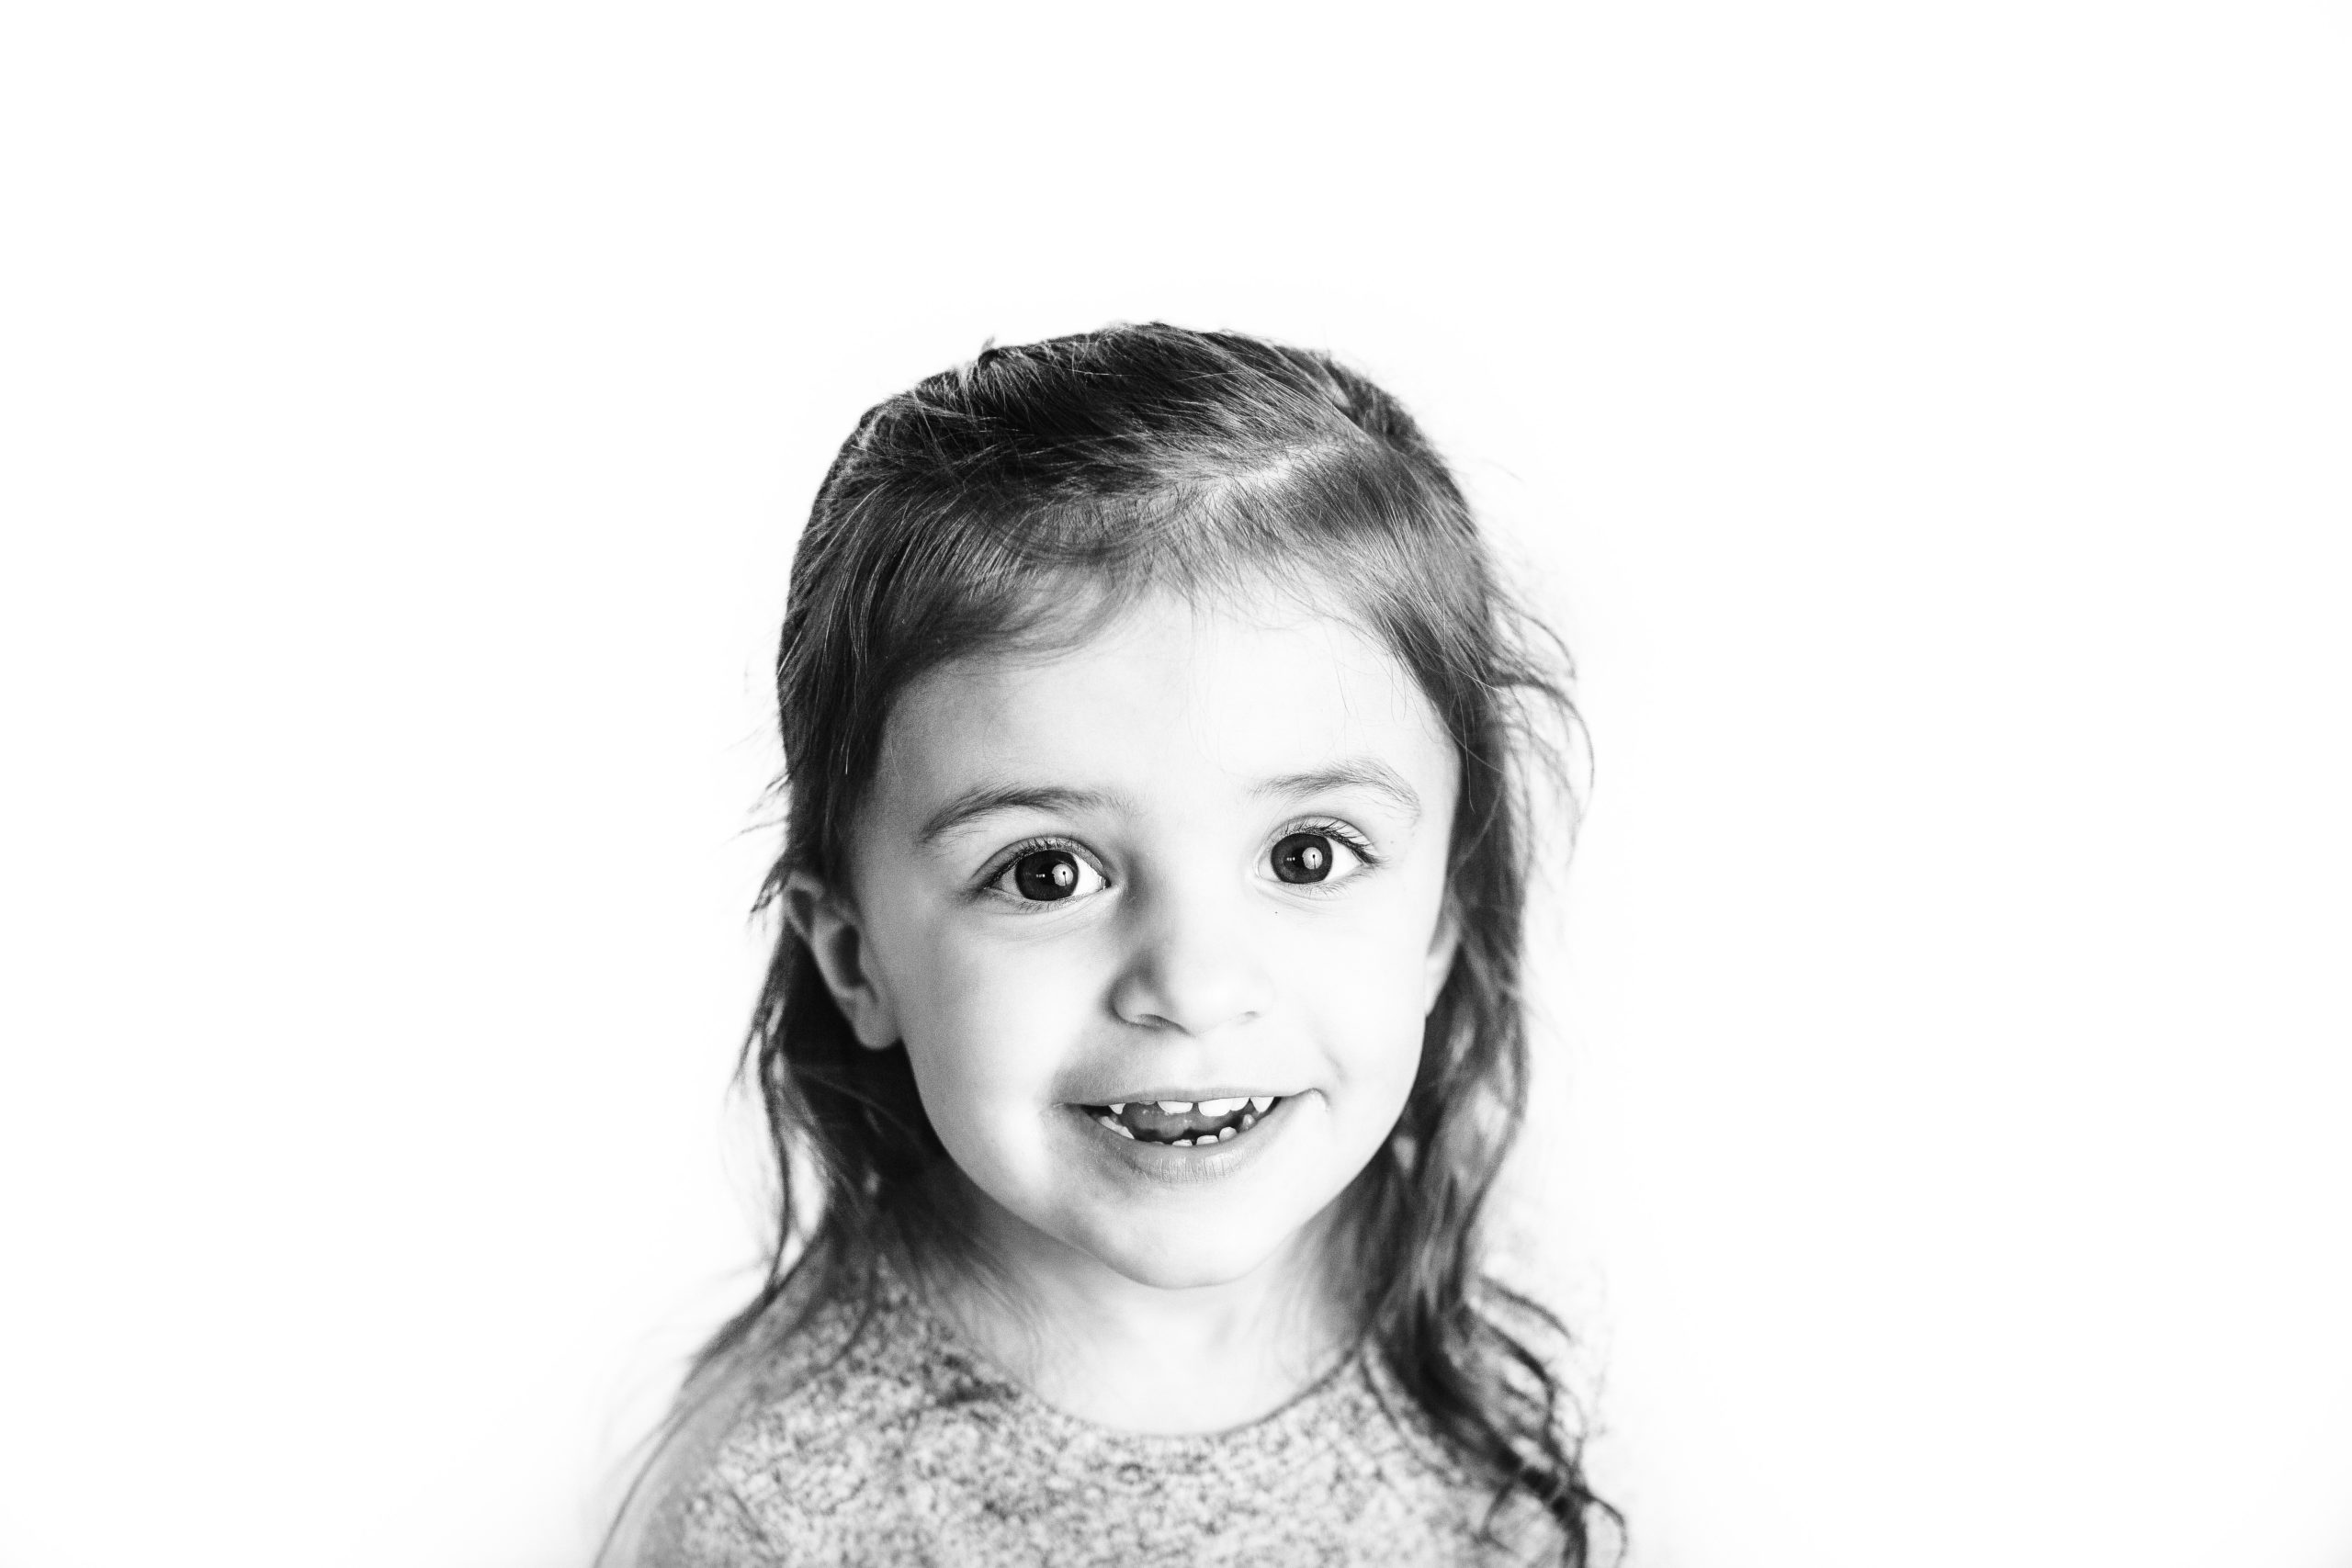 Image shows a young girl smiling during her expression session by Cedar Rapids Child Photographer Ali